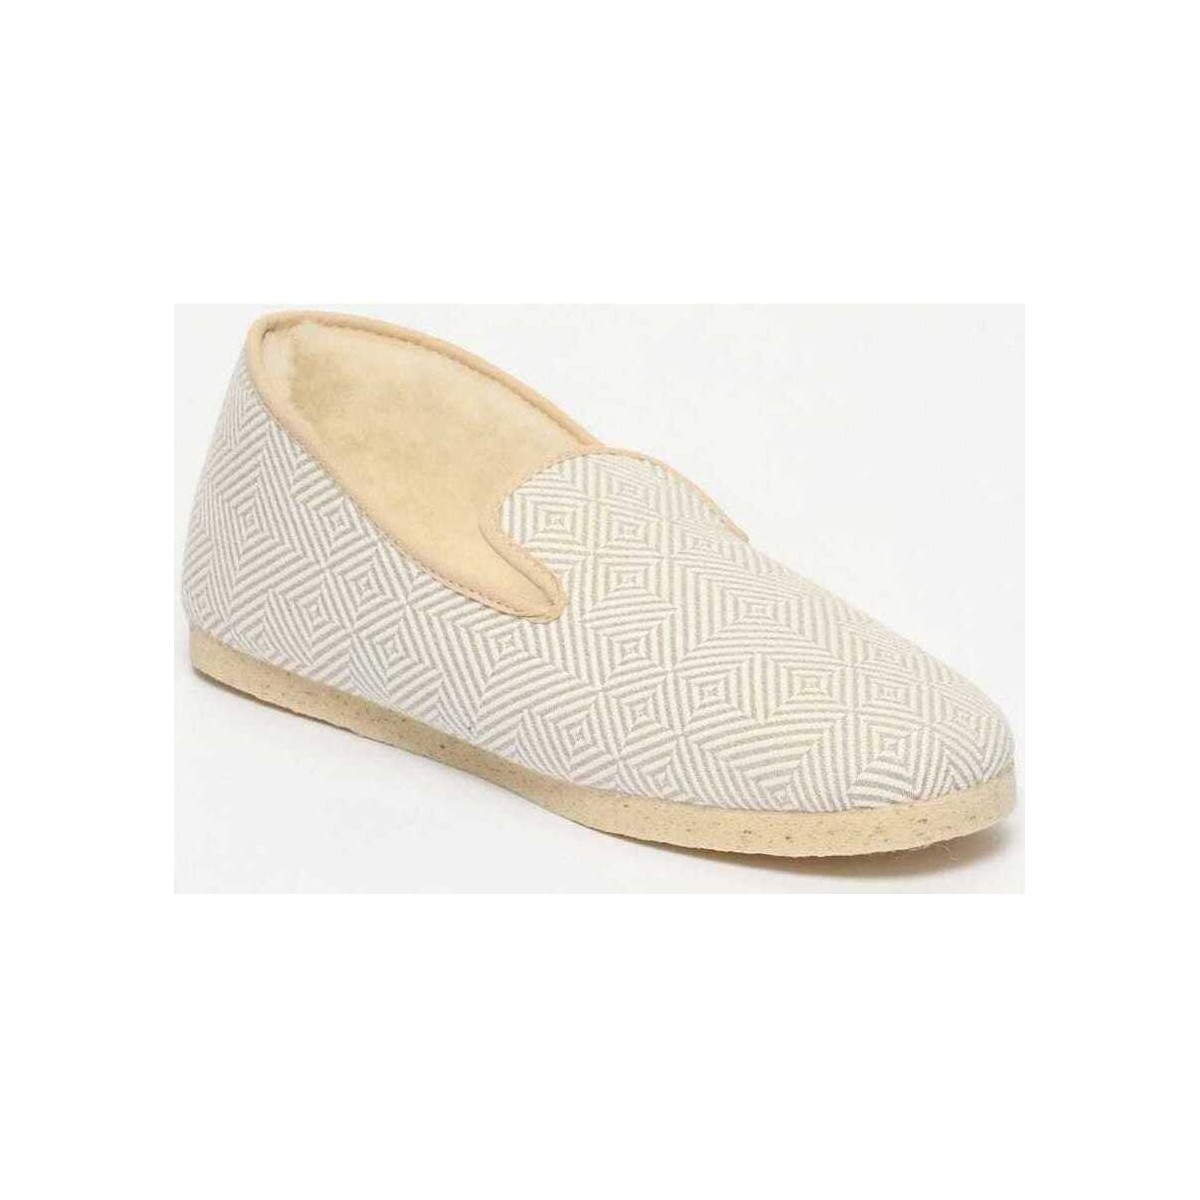 Chaussures Chaussons Amos Chaussons La psychée - Blanc & beige Blanc